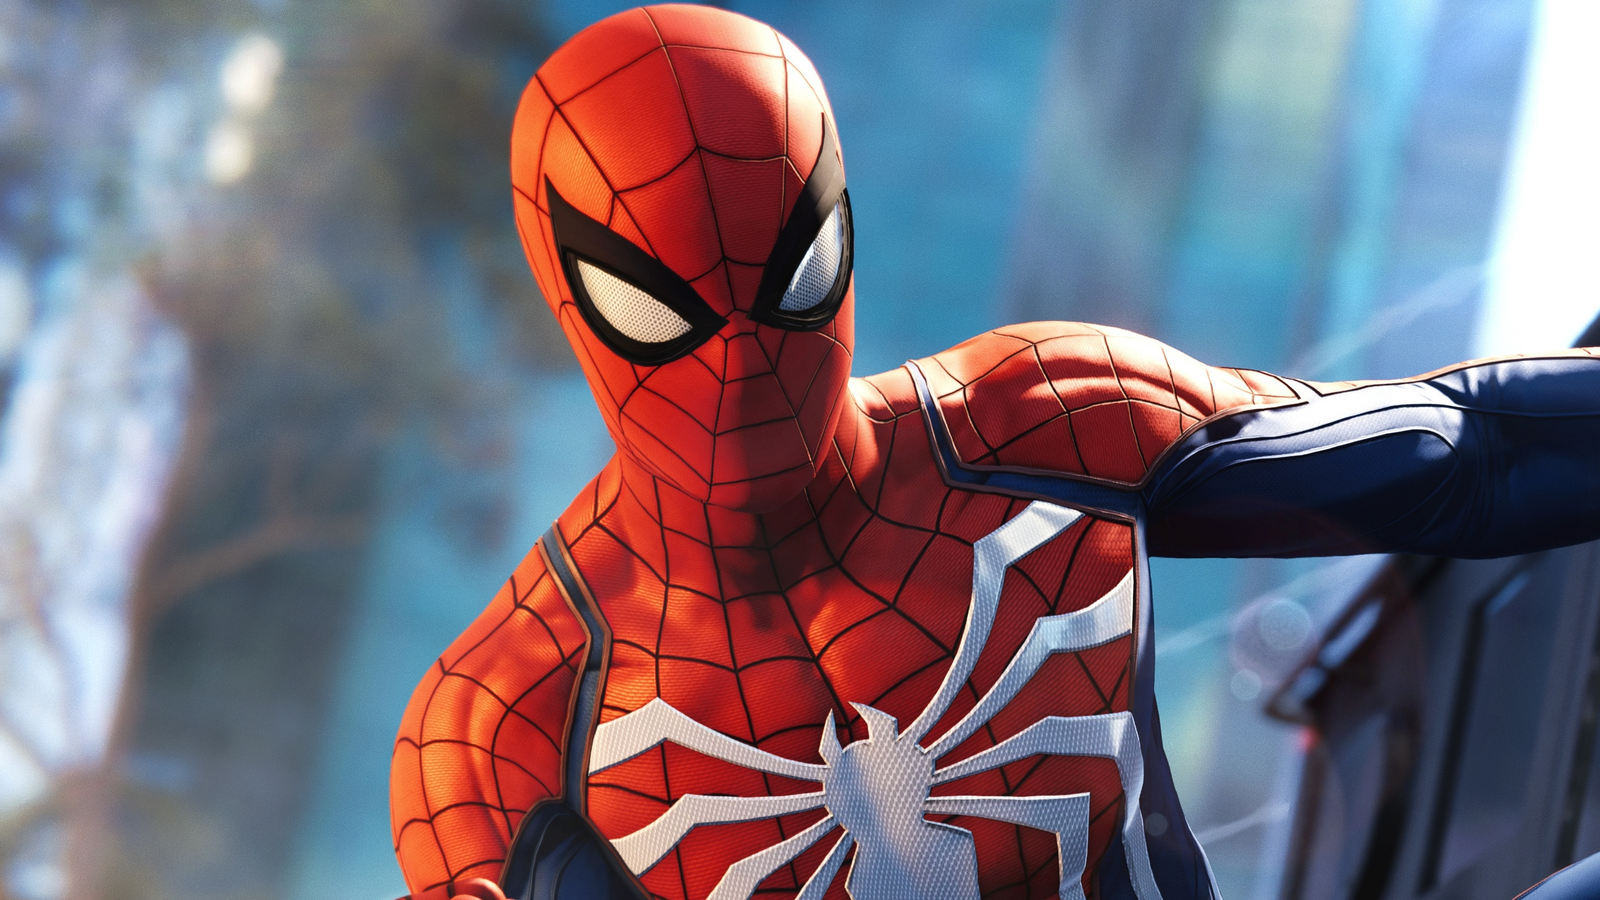 Marvel's Spider-Man - Insomniac's technology swings to new heights ...